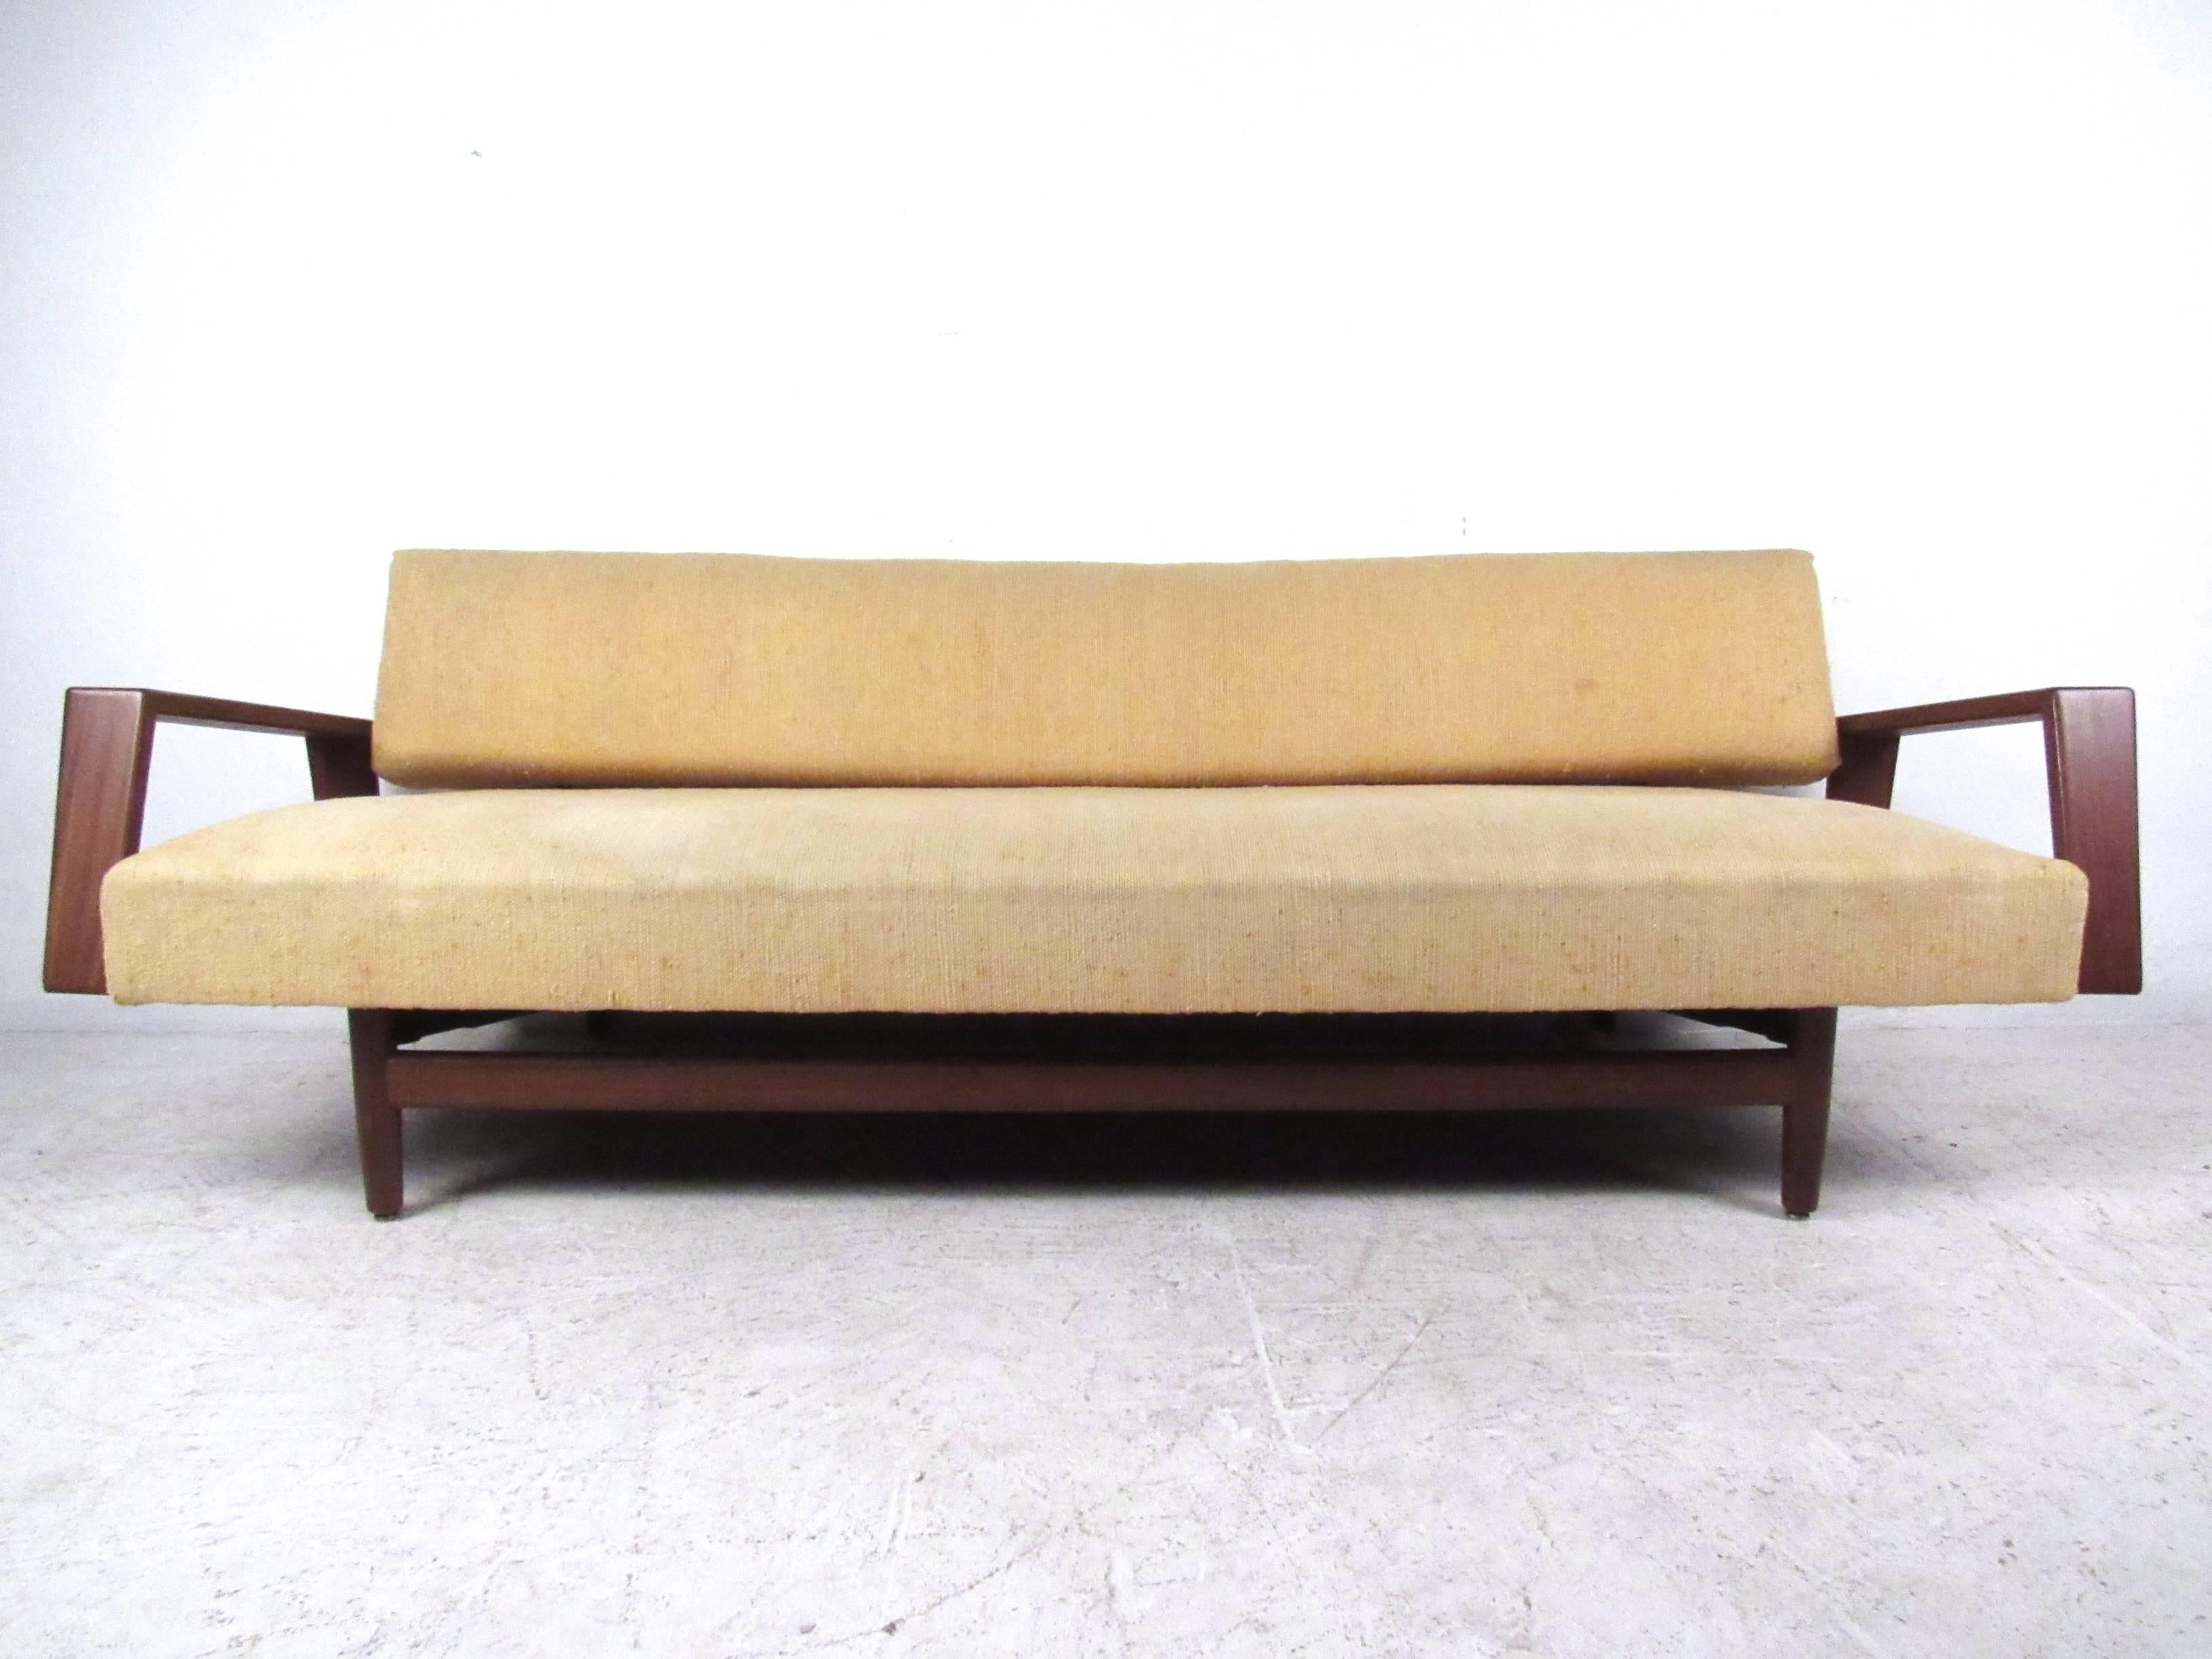 This unique vintage sofa offers comfortable seating in a stylish package. Wide sculpted armrests and tapered leg stretchers add to the style of the piece, making it a great sofa for any setting. The piece allows for daybed style extension, opening